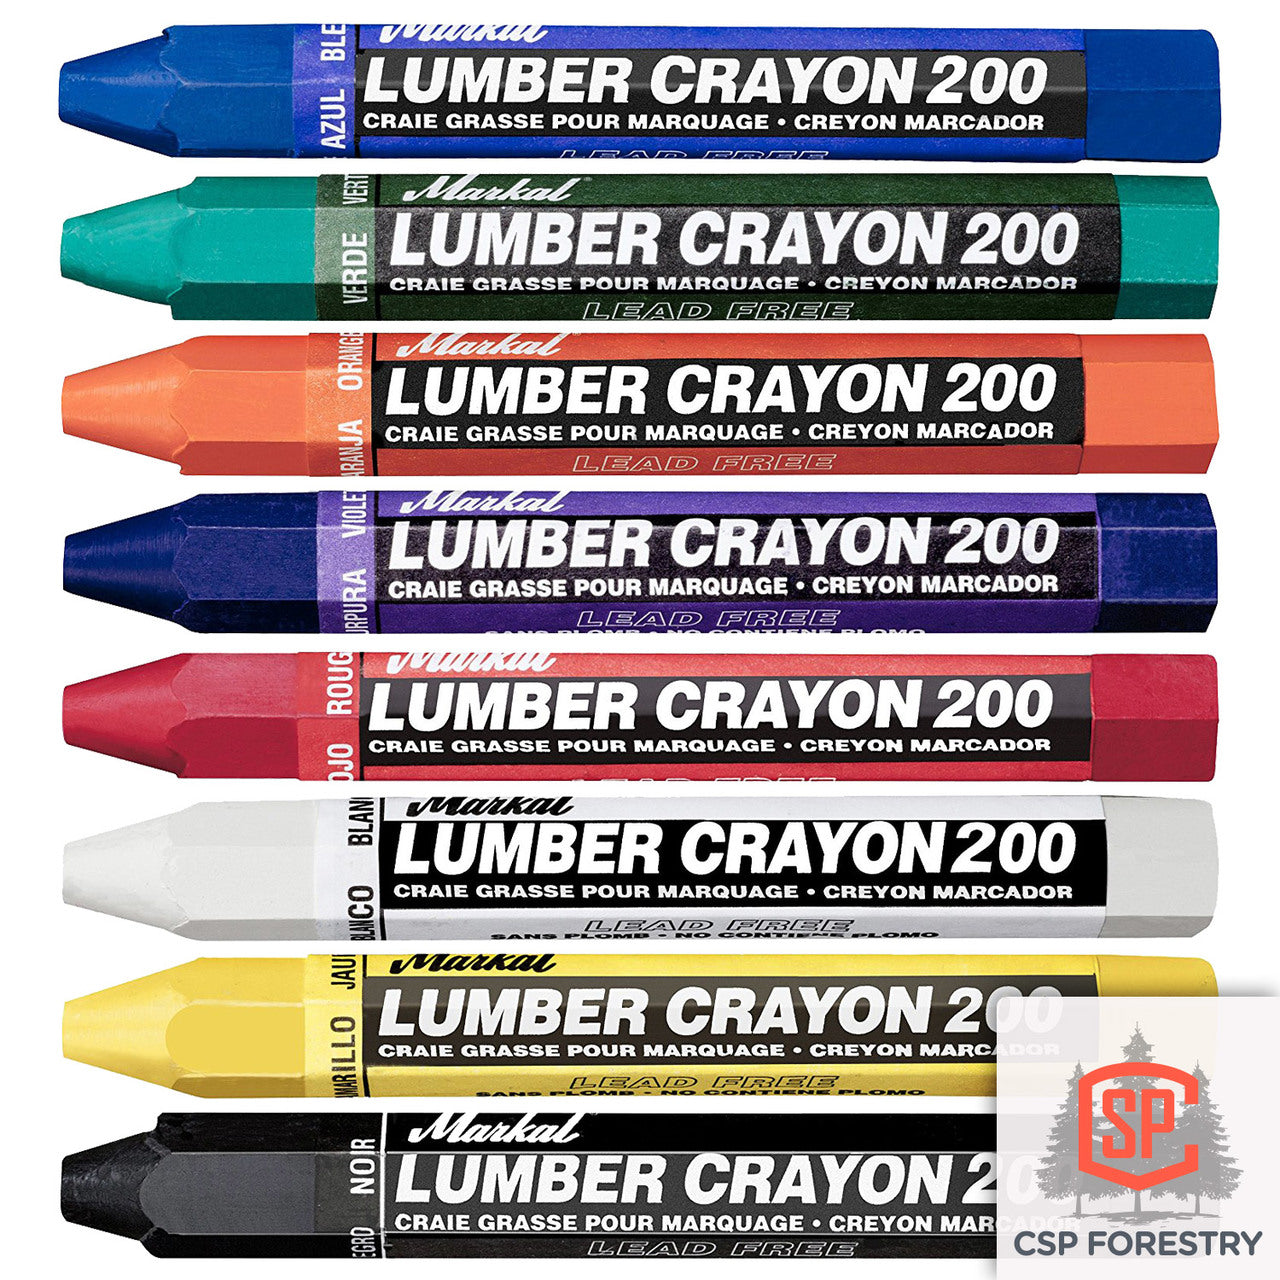 LUMBER CRAYON #200, Gateway Graphics & Rubber Stamps Inc